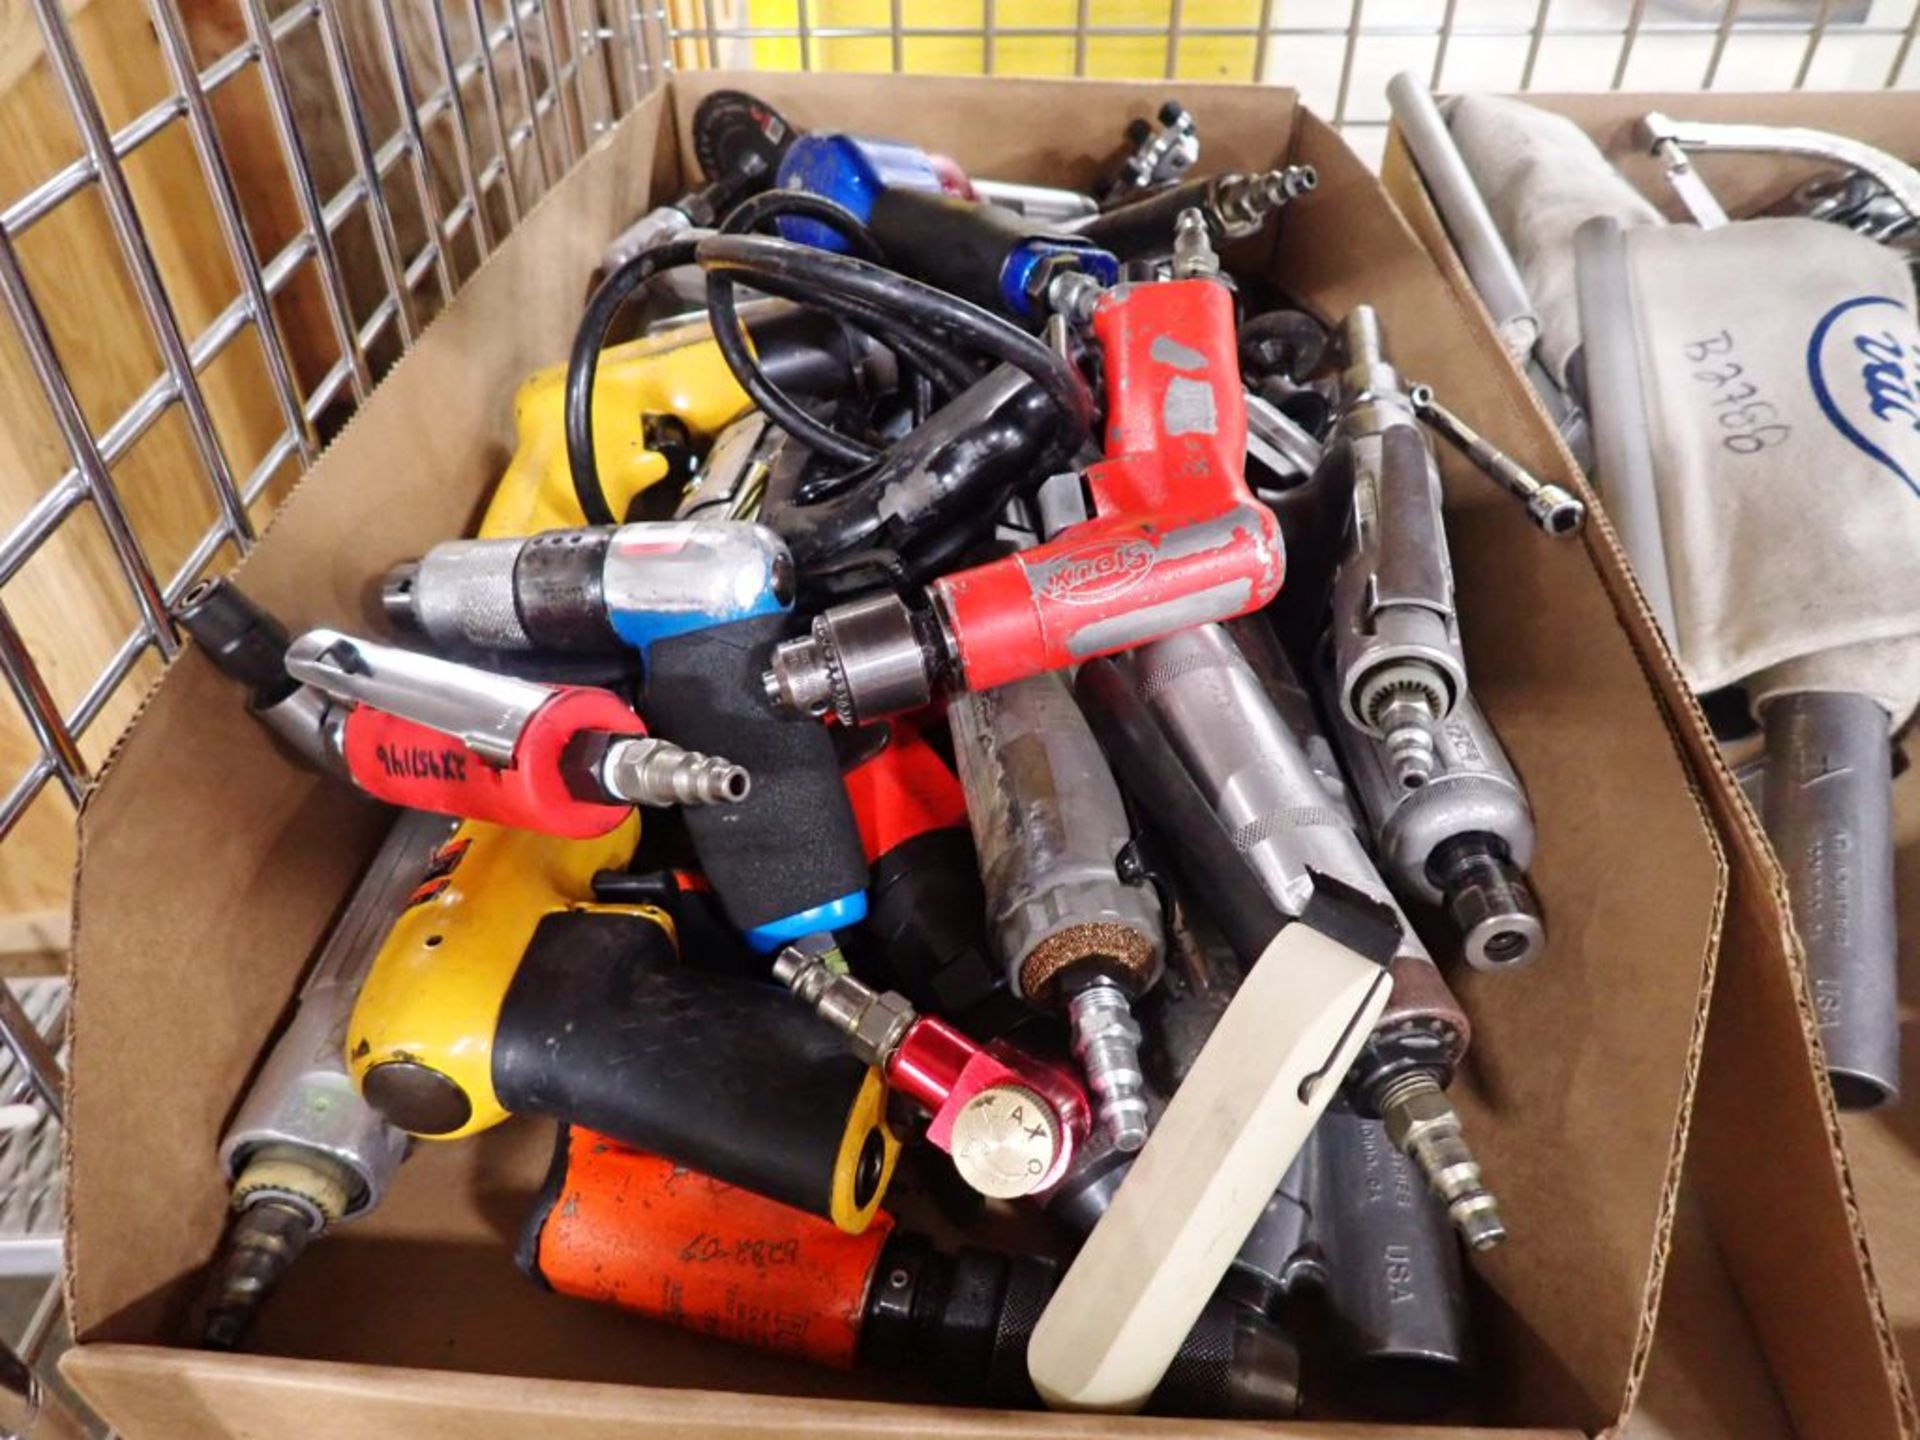 Lot of Assorted Tools | Tag: 241626 | Limited Forklift Assistance Available - $10.00 Lot Loading - Image 3 of 6